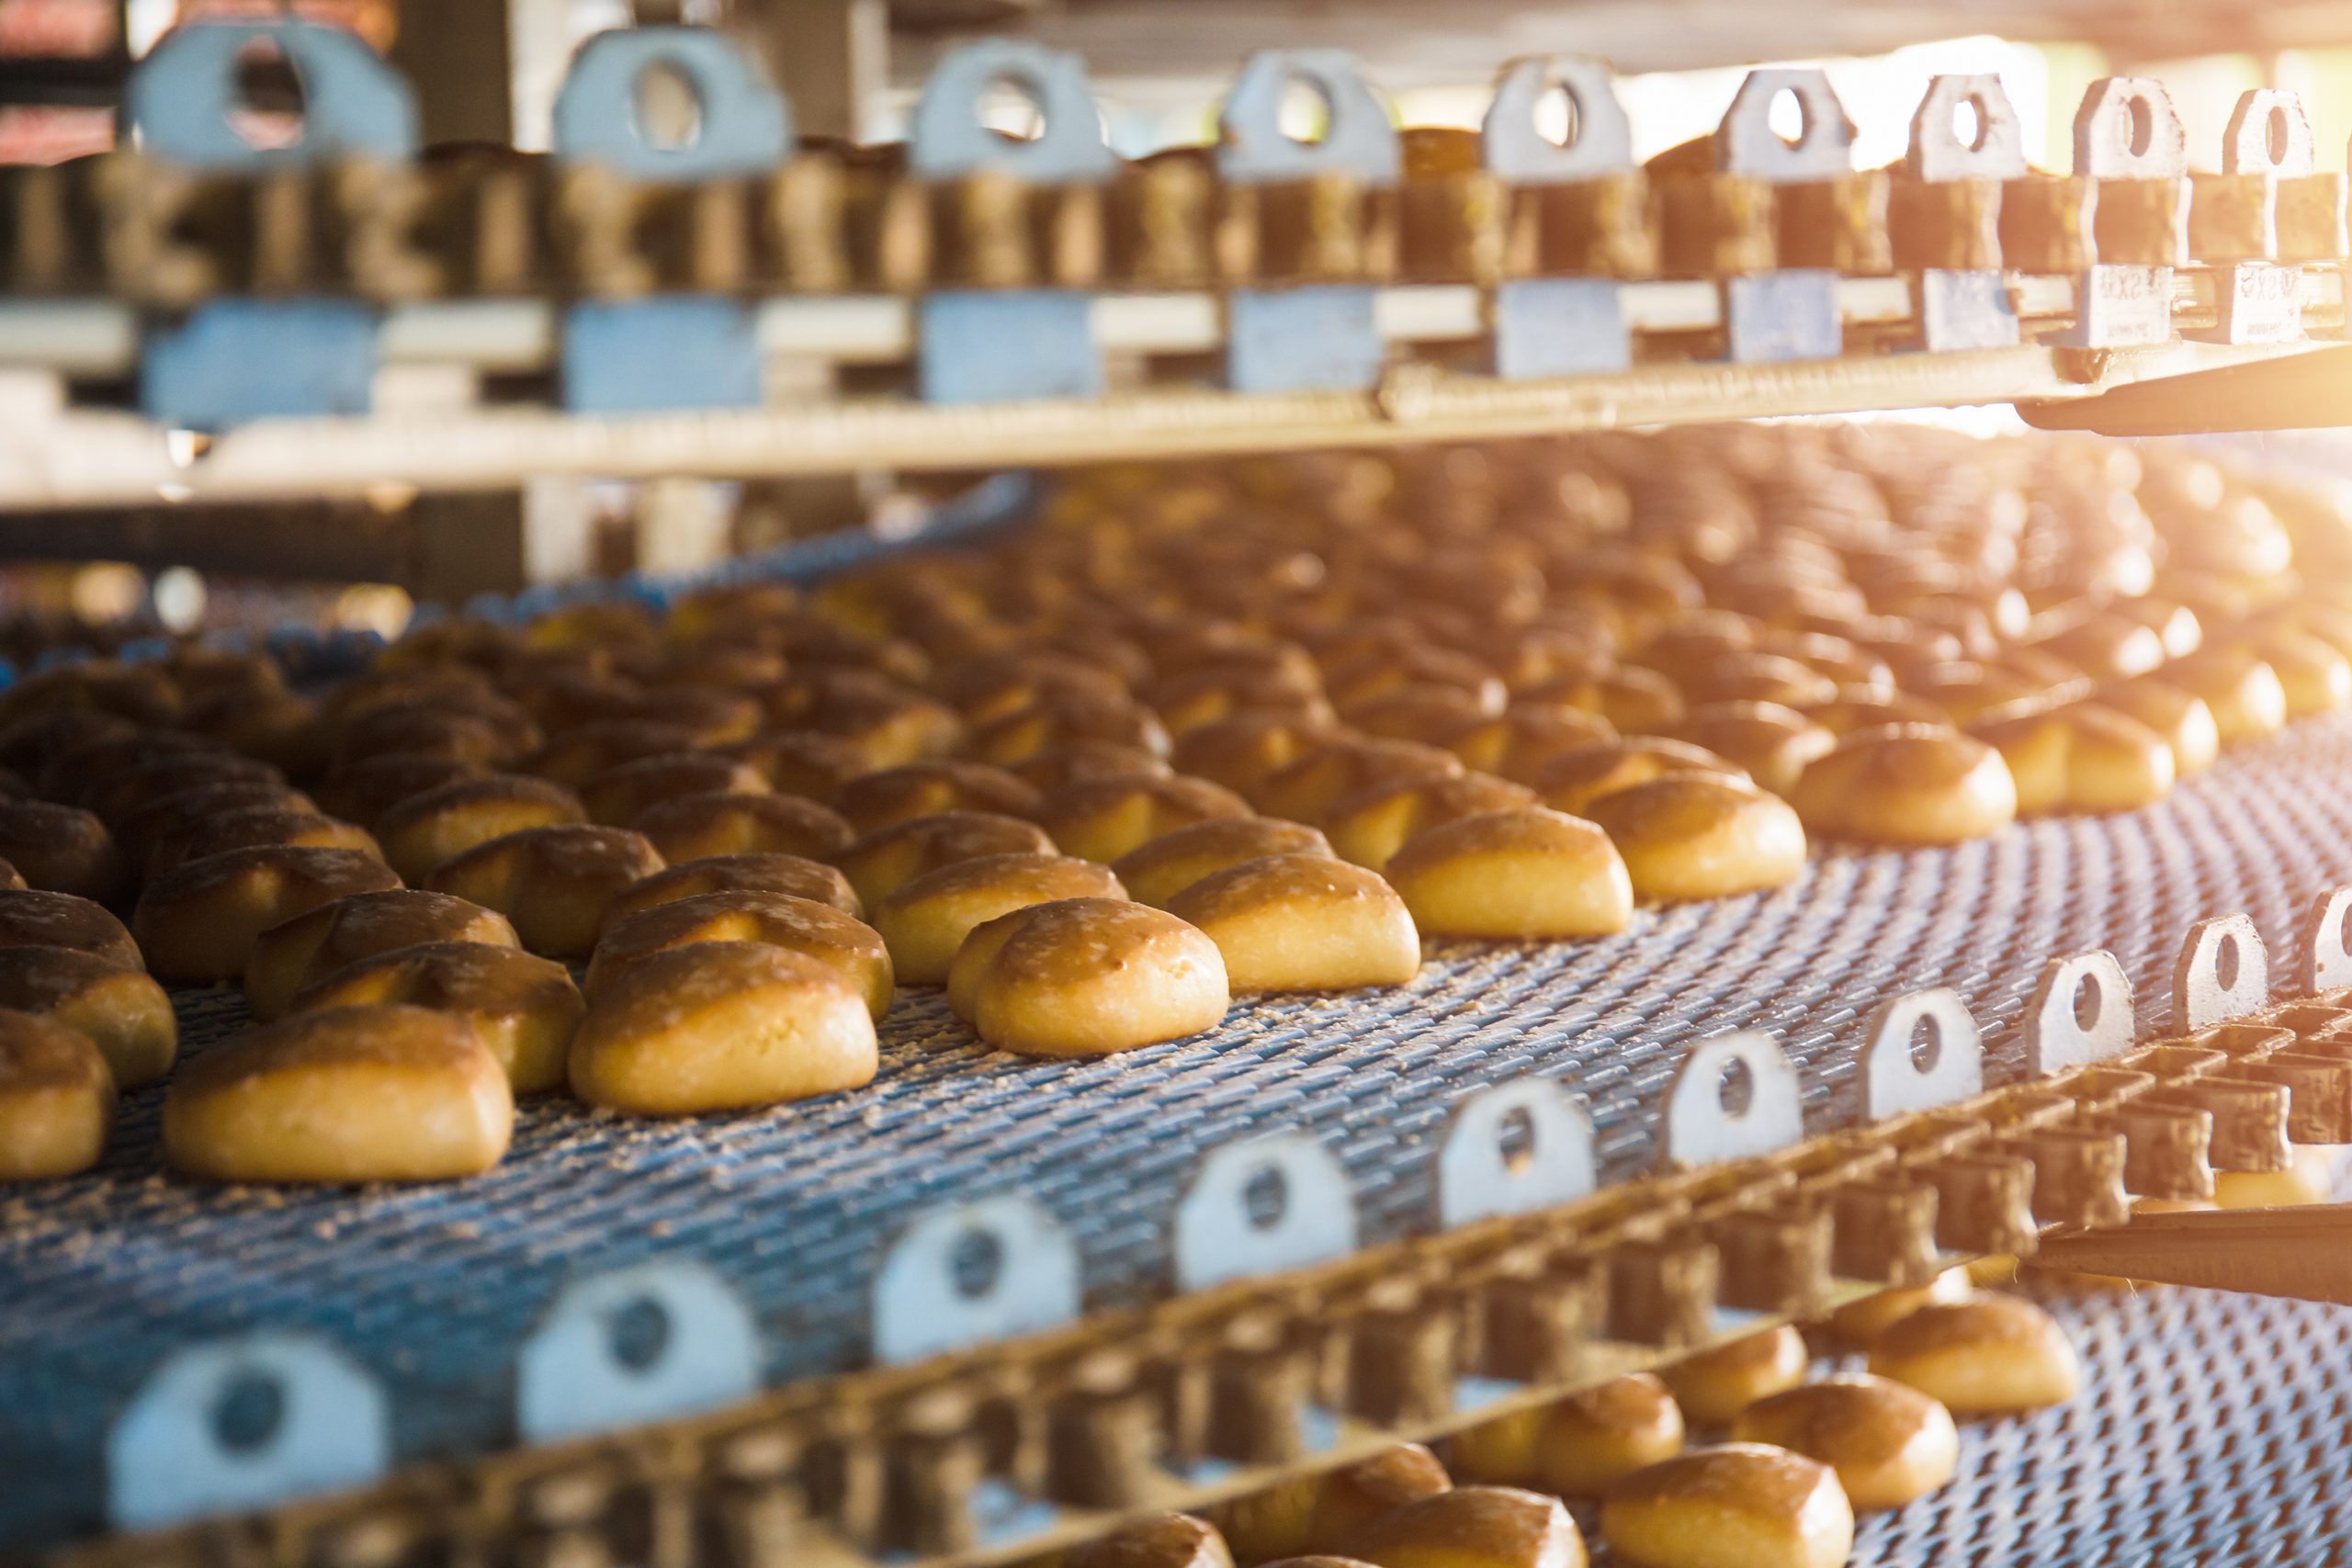 Cakes on automatic conveyor belt or line, process of baking in confectionery culinary factory or plant. Food industry, cookie and other sweet breadstuff production, toned, close up